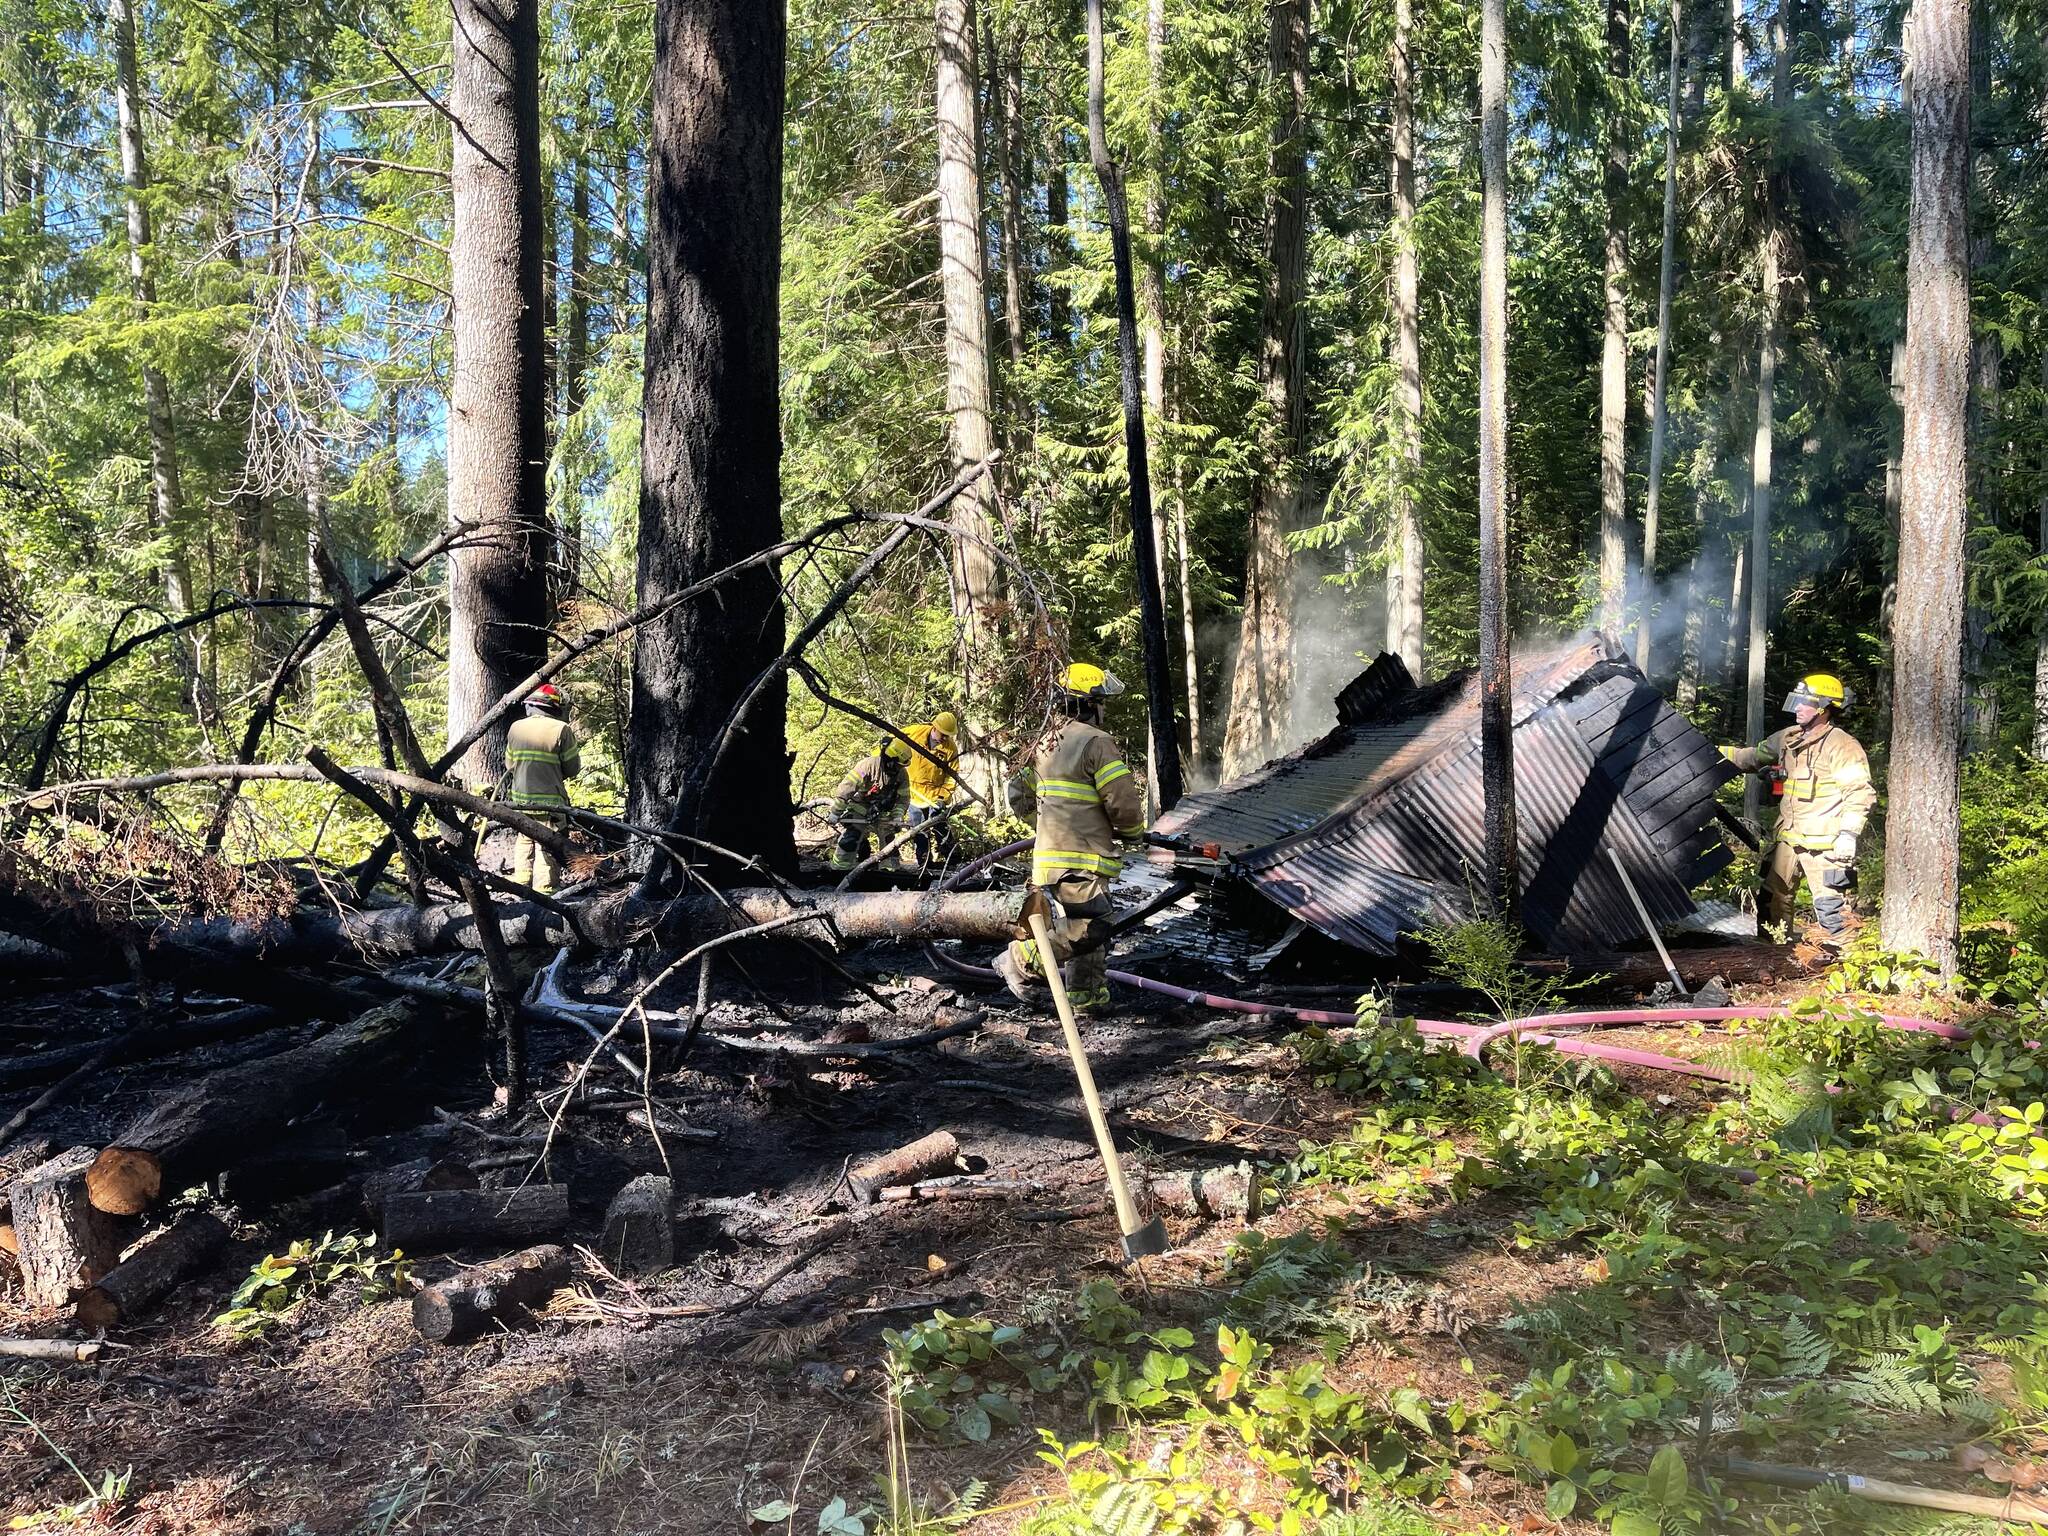 Photo provided
Firefighters from South Whidbey Fire/EMS responded Sunday to a fire in the woods behind the Bayview Cemetery.